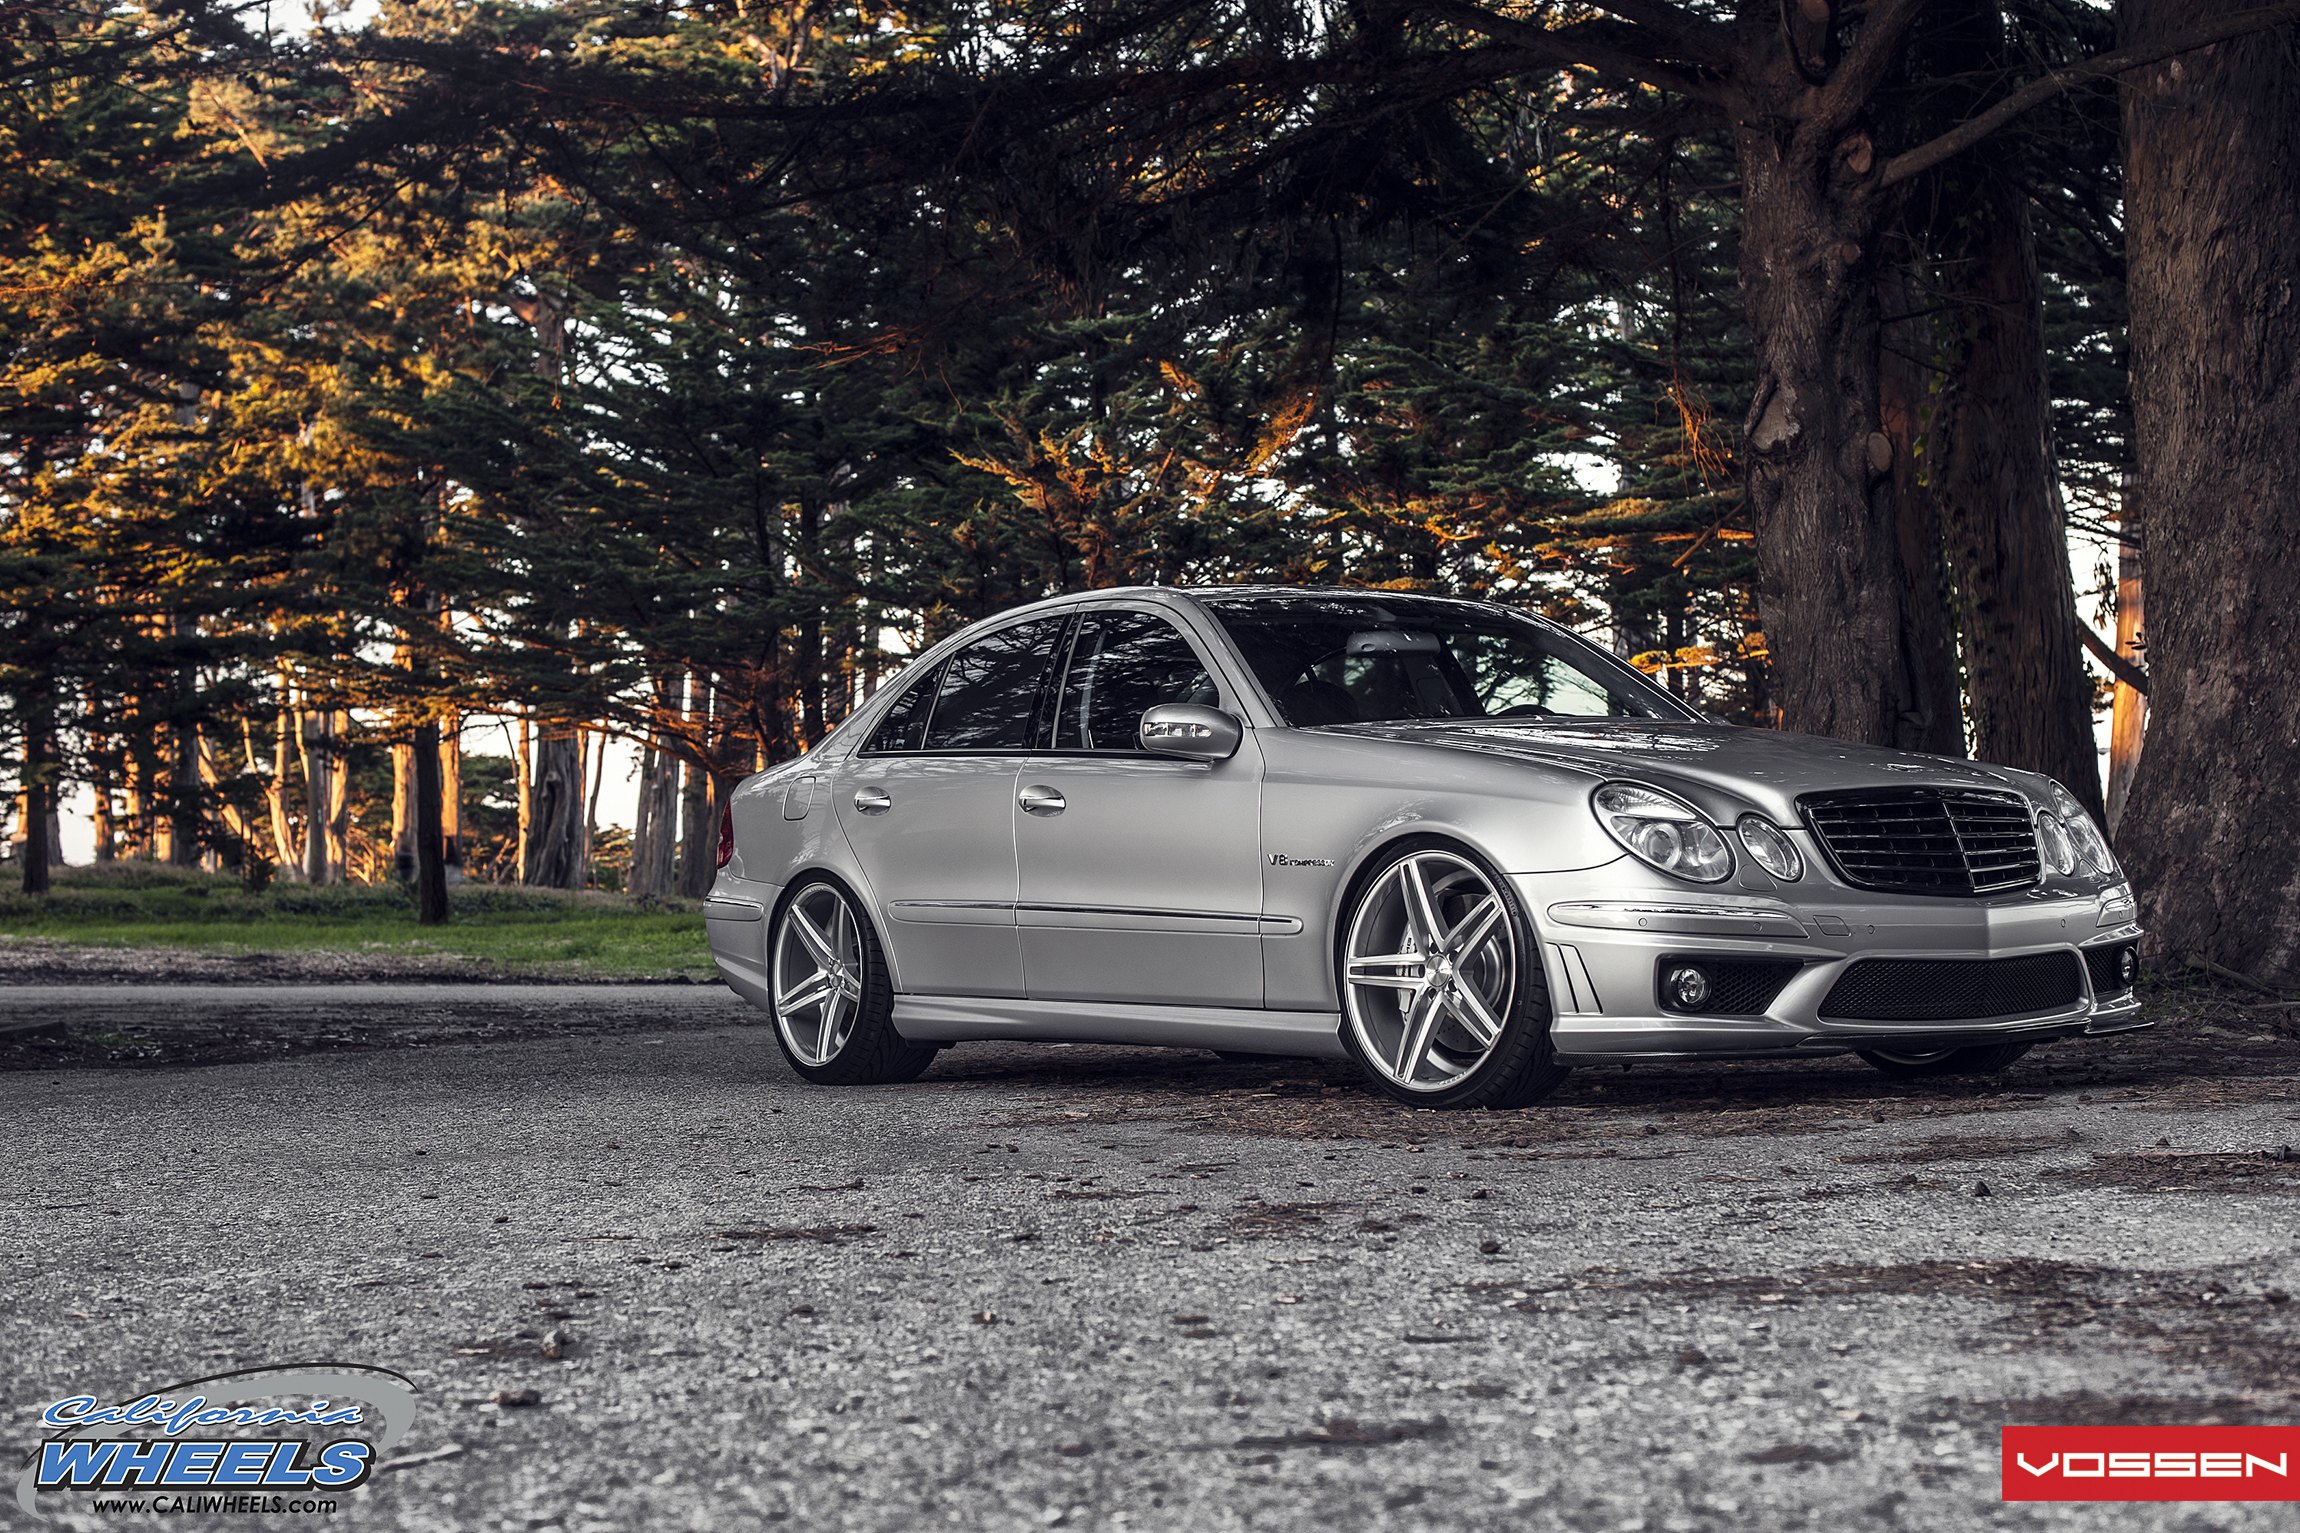 Silver Mercedes E Class with Custom Halo Headlights - Photo by Vossen